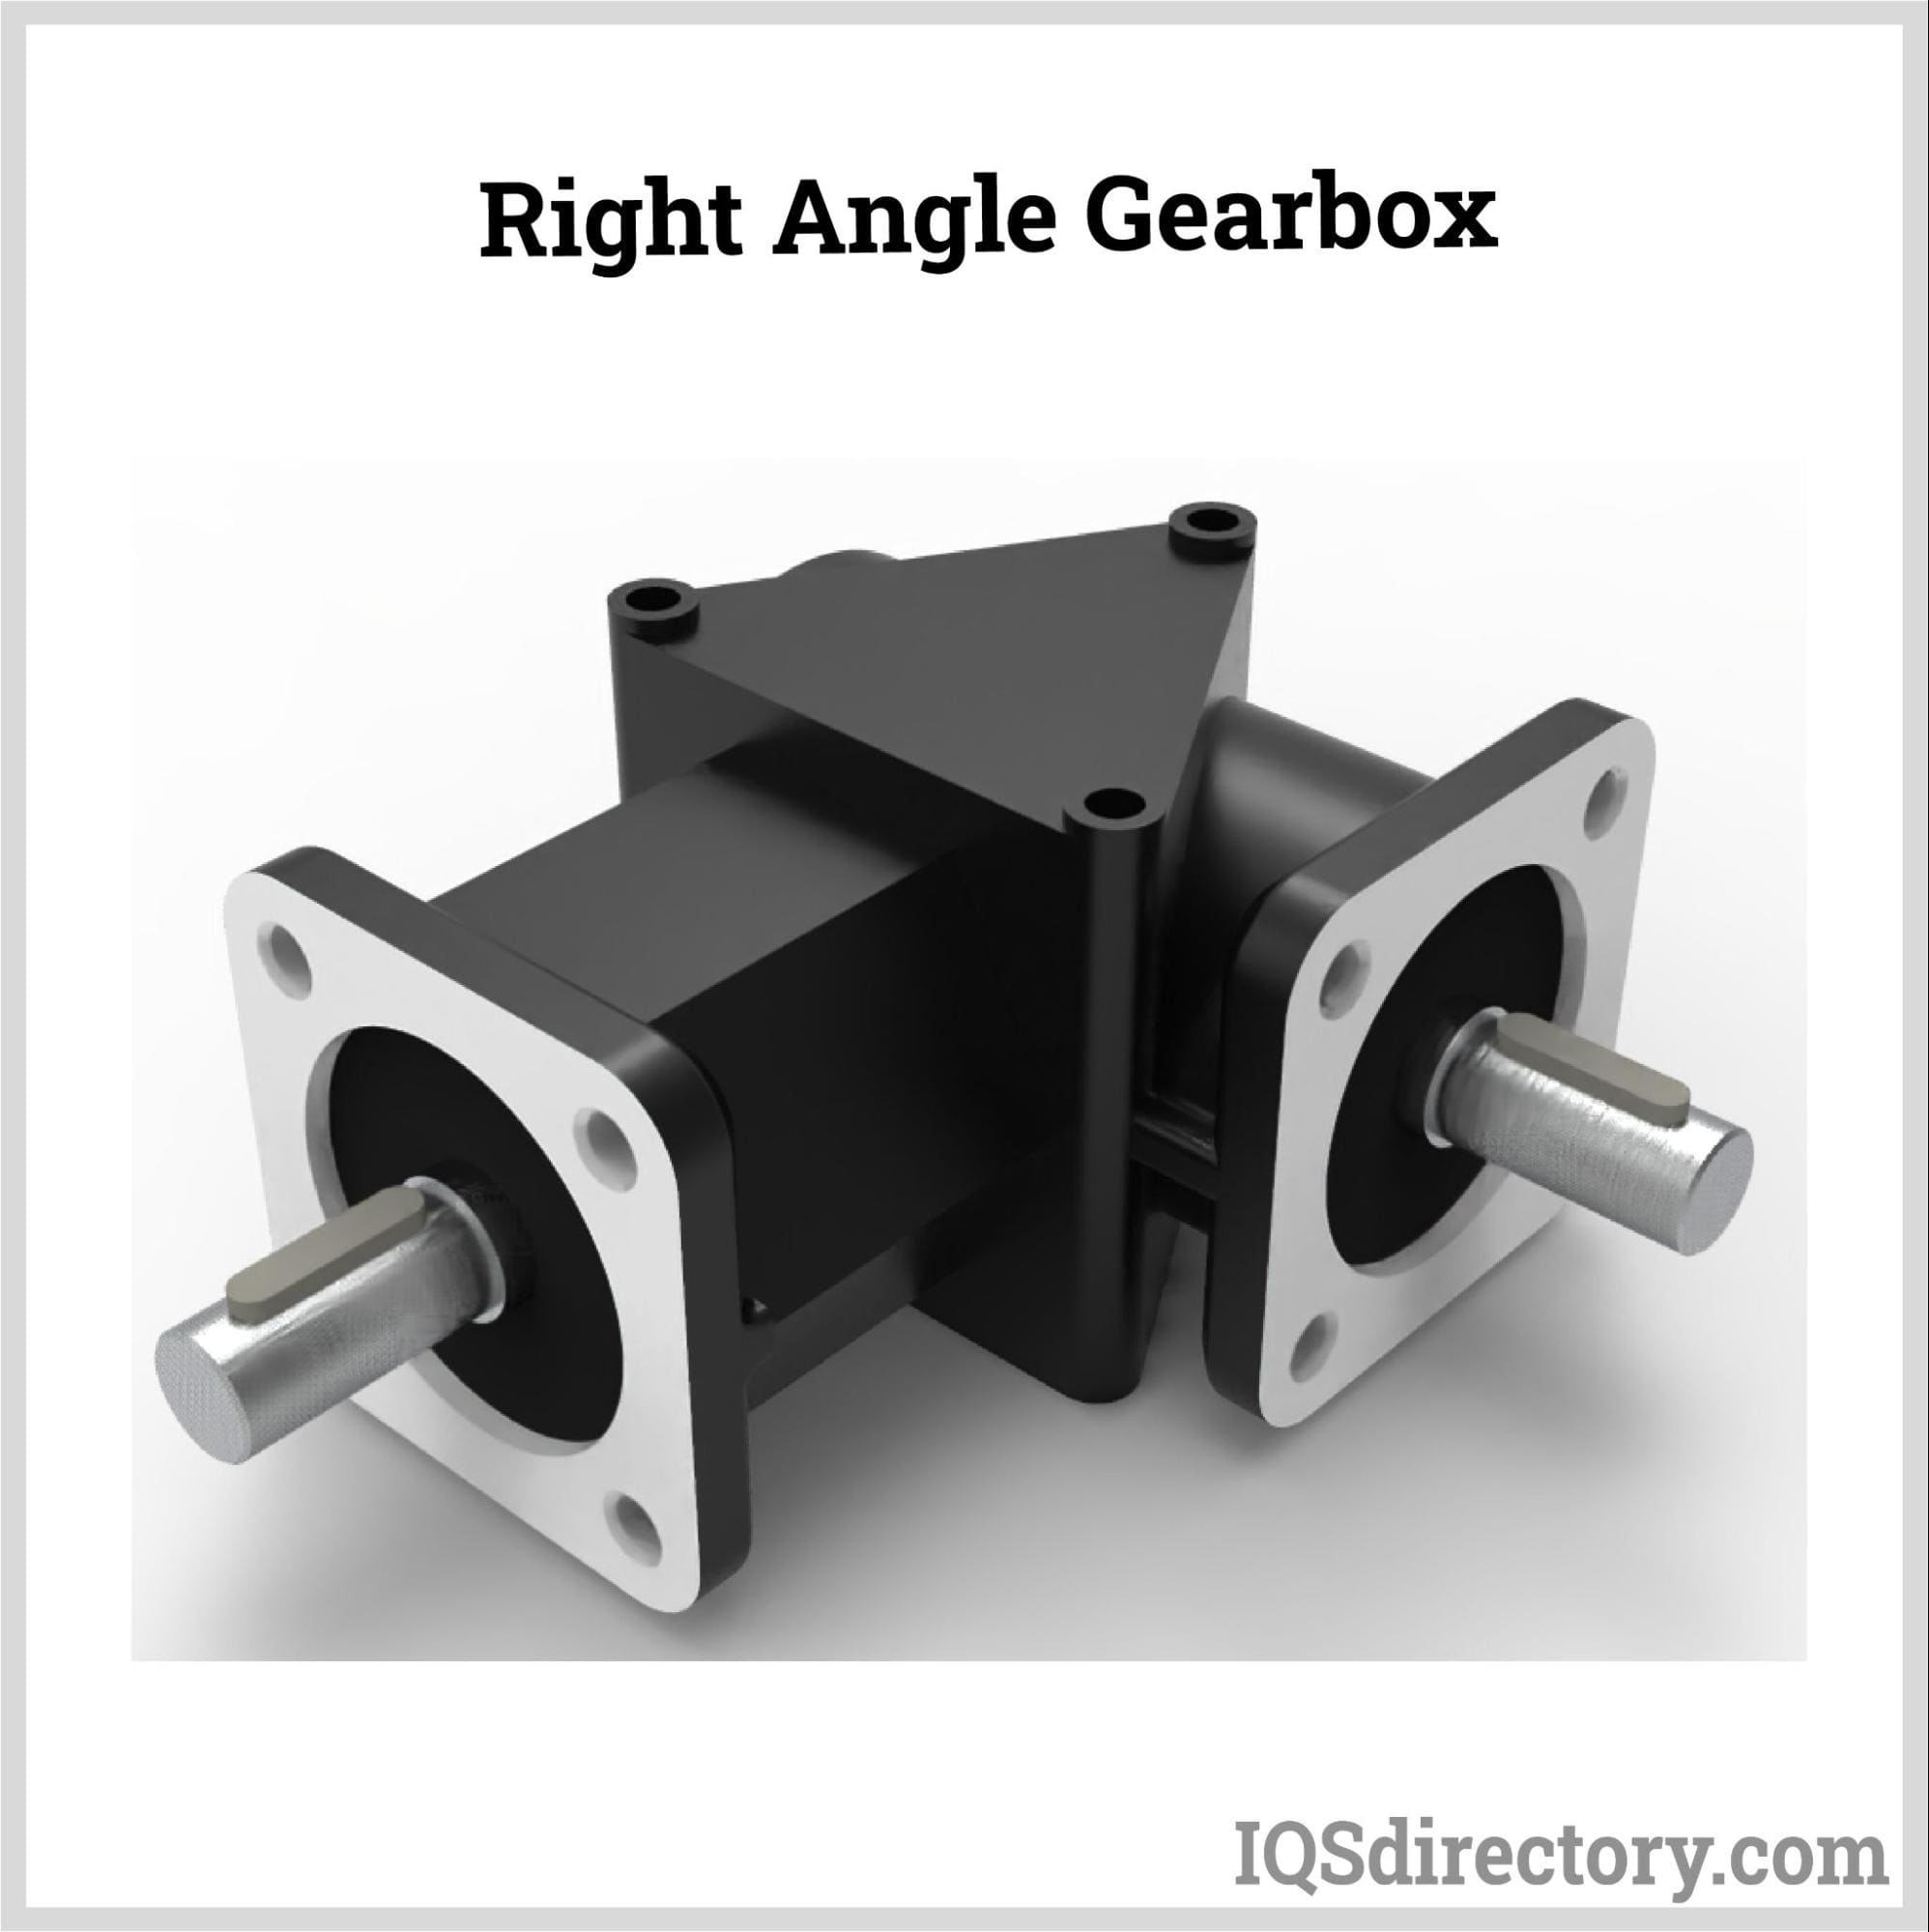 The Definitive Guide to Right Angle Gearboxes